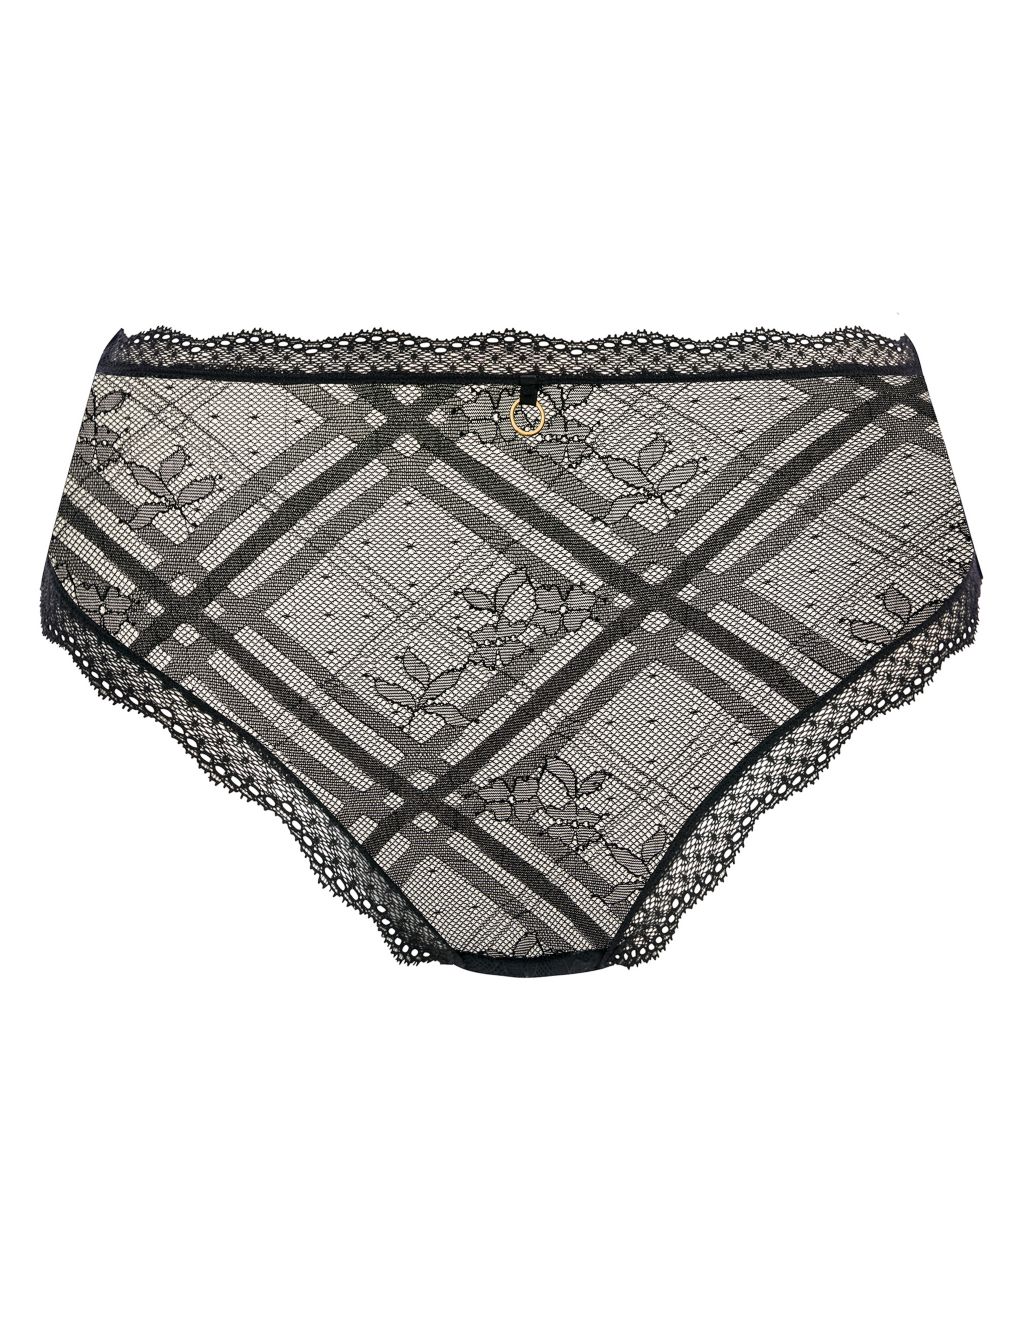 Freya Fatale Mesh Embroidered Full Briefs 1 of 6